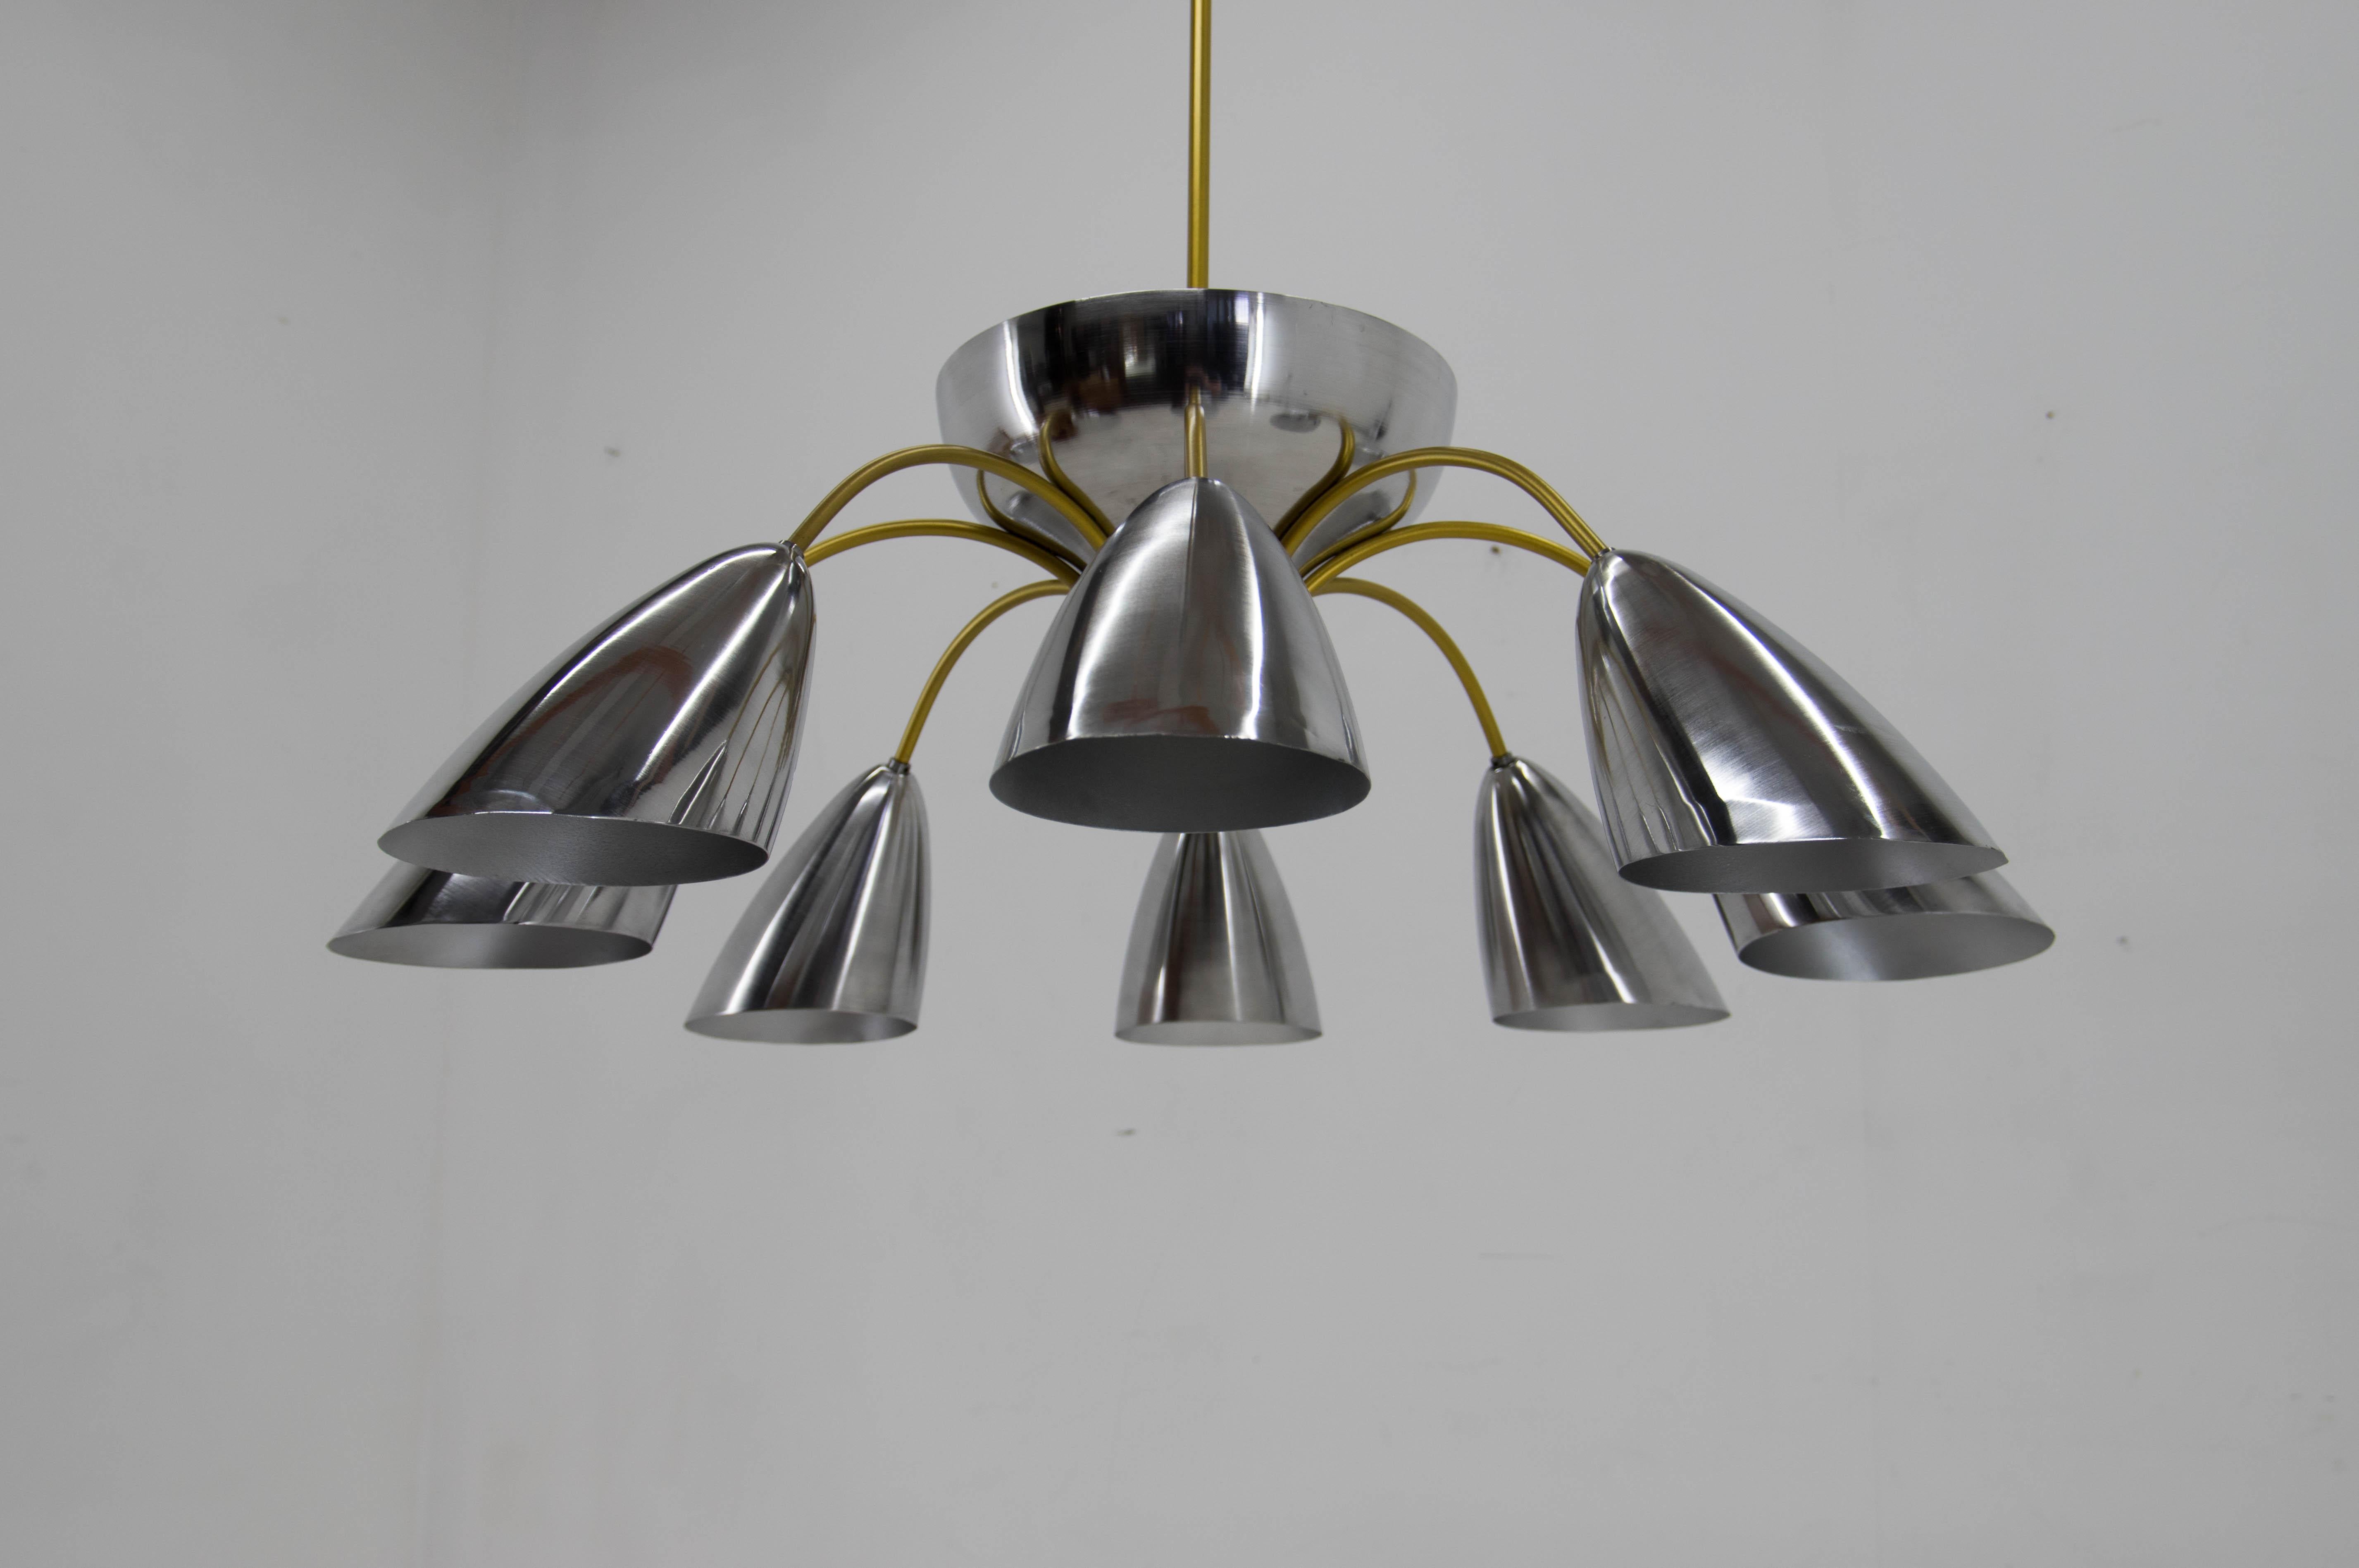 Extraordinary Space Age chandelier custom made in 1960s. Only few pieces were made for representative purposes in Czech factory. This piece was carefully disassembled, cleaned, the steel arms repainted to the original brass color, aluminum shades